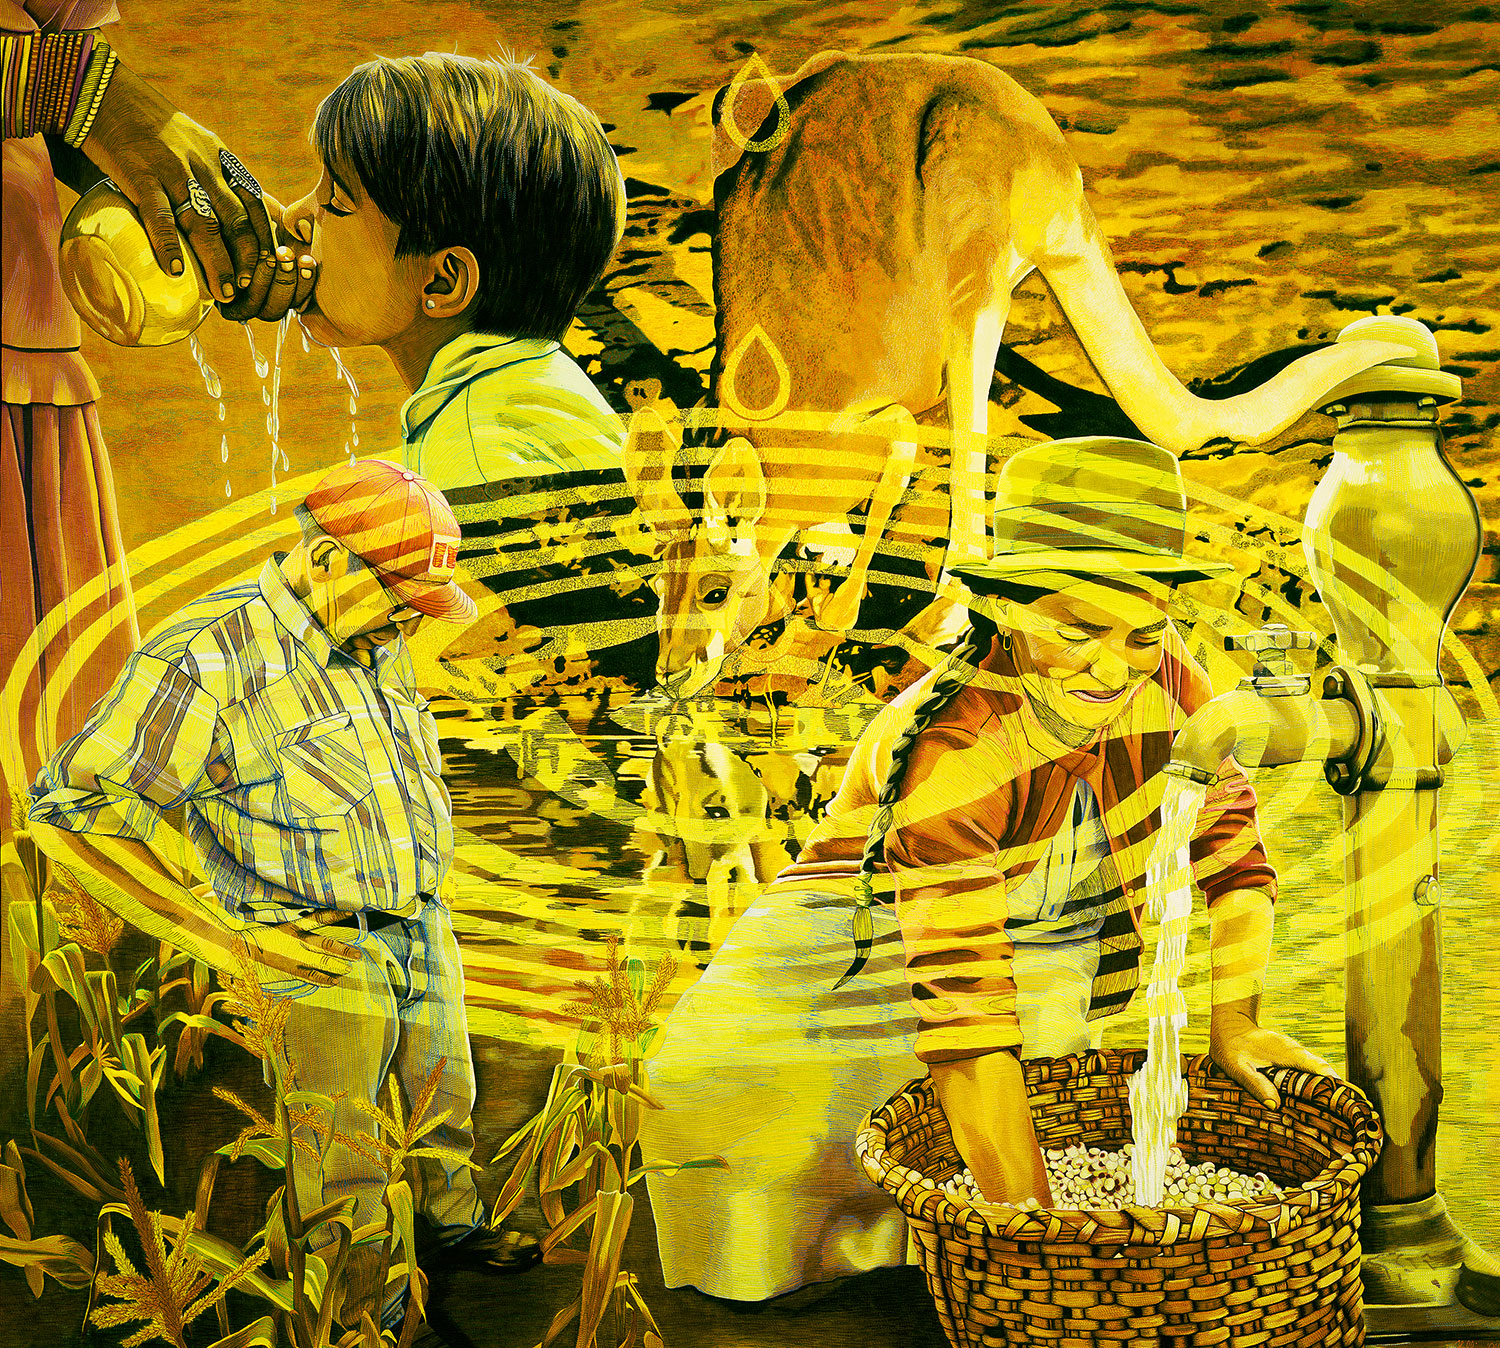 a water scene with multiple people and animals in many different shades of yellow